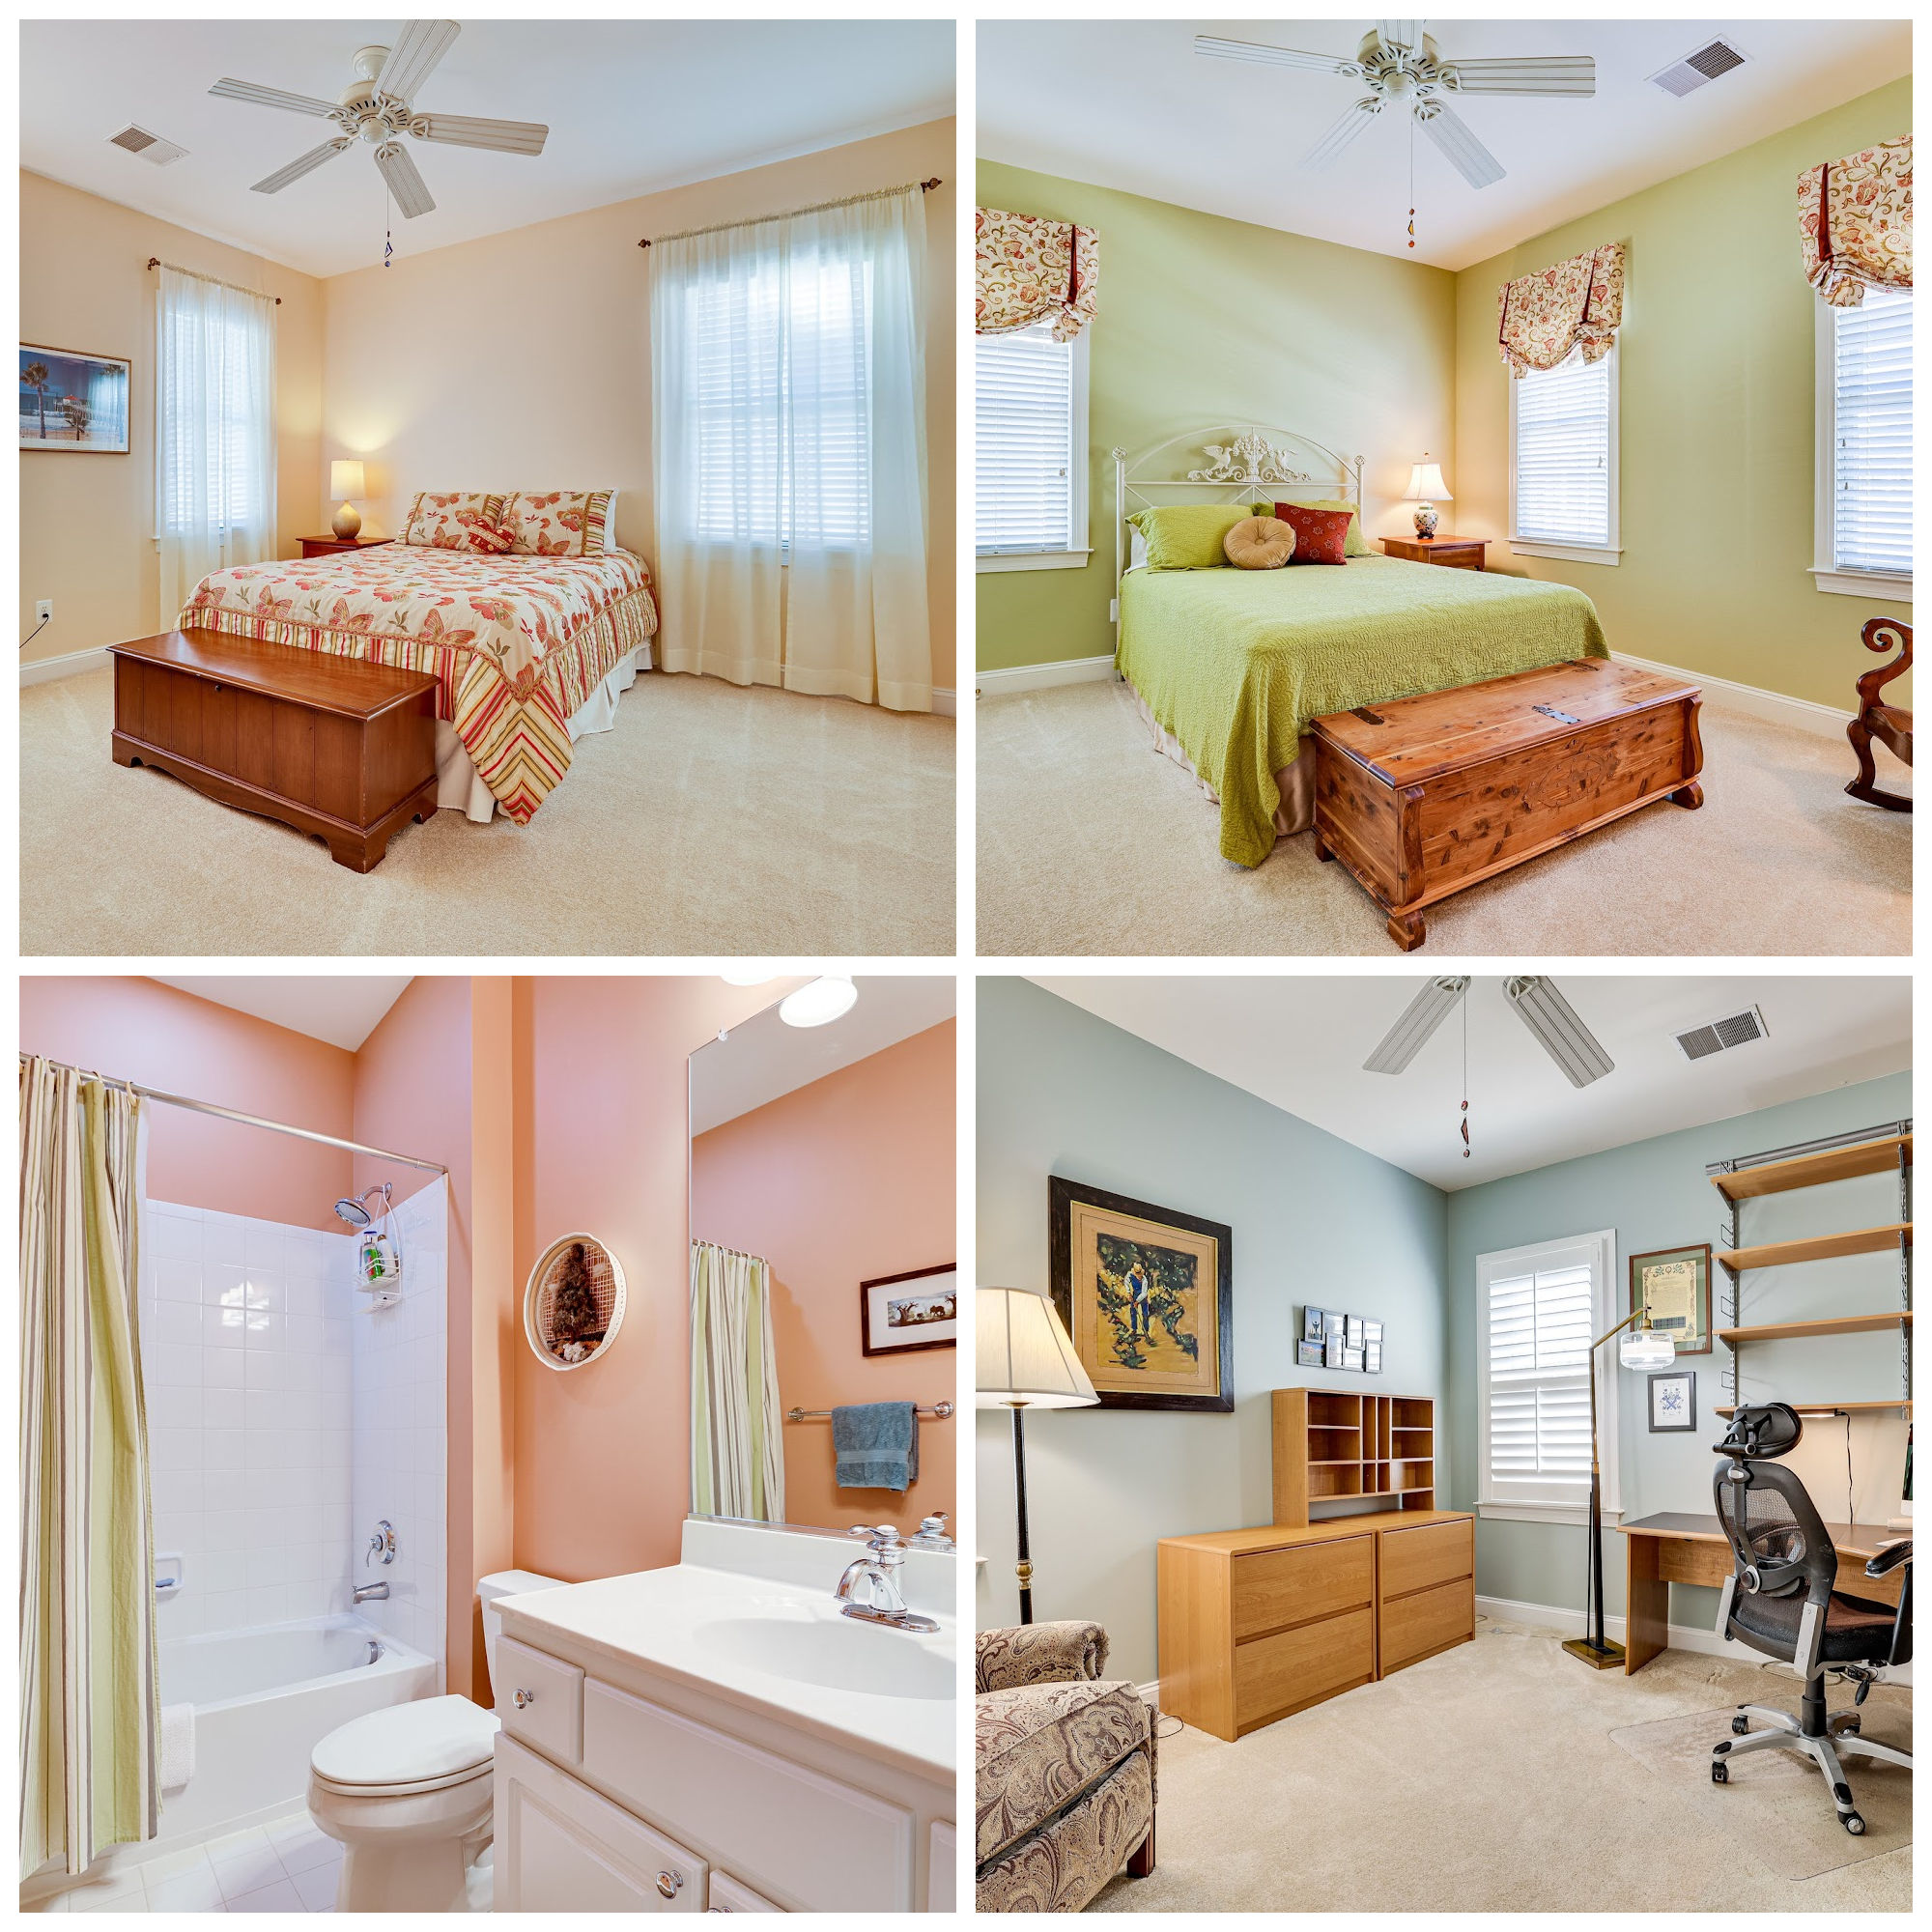 113 Amalfi Ct, Purcellville- Additional Bedrooms and Bathroom